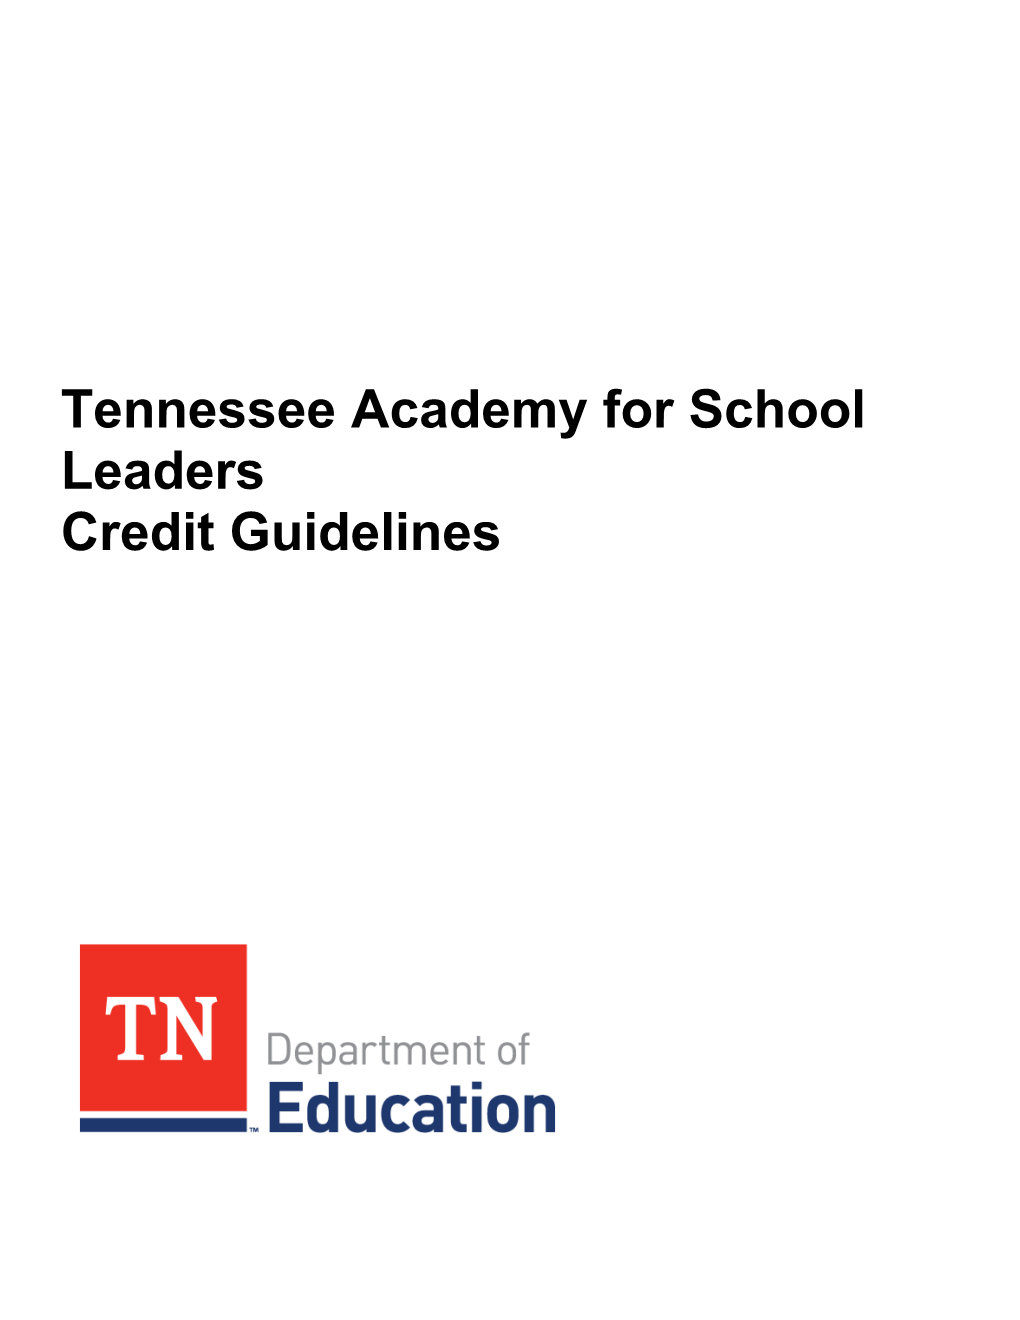 TENNESSEE ACADEMY For SCHOOL LEADERS